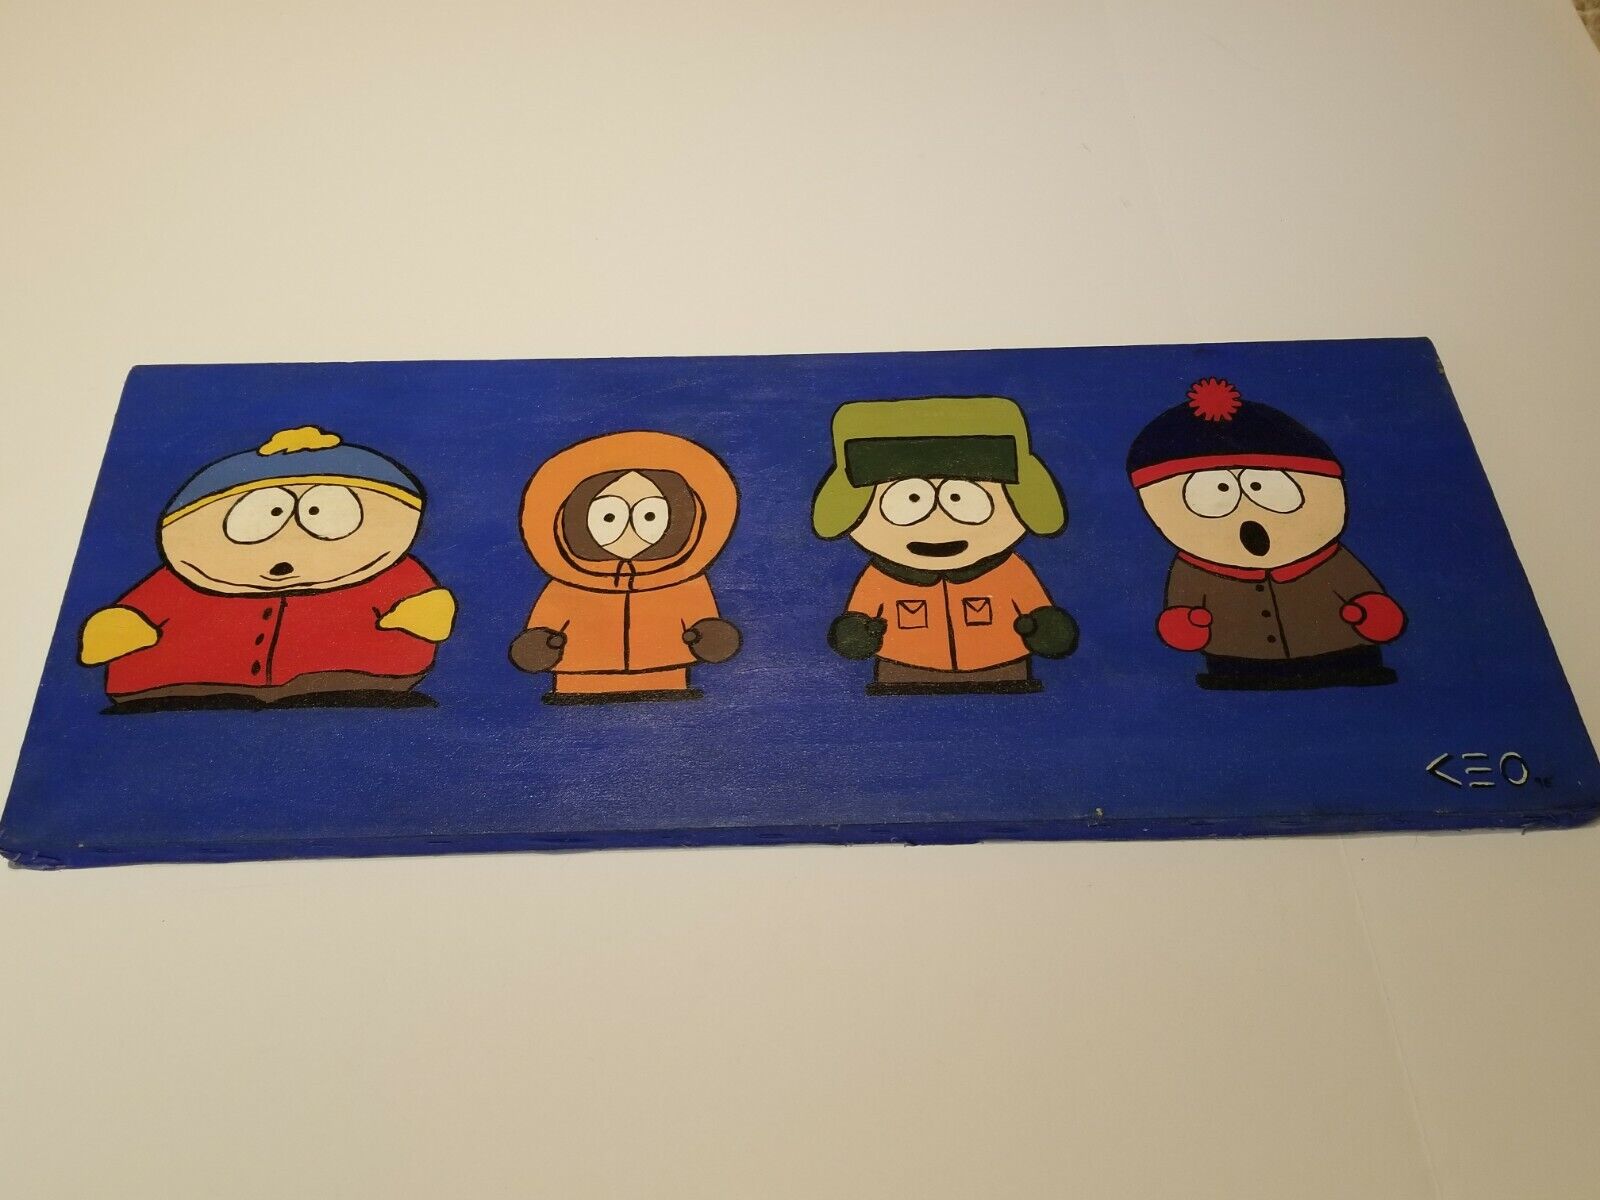 South Park Crew Hand Painted Acrylic On Canvas Painting 11x28 OOAK Original 